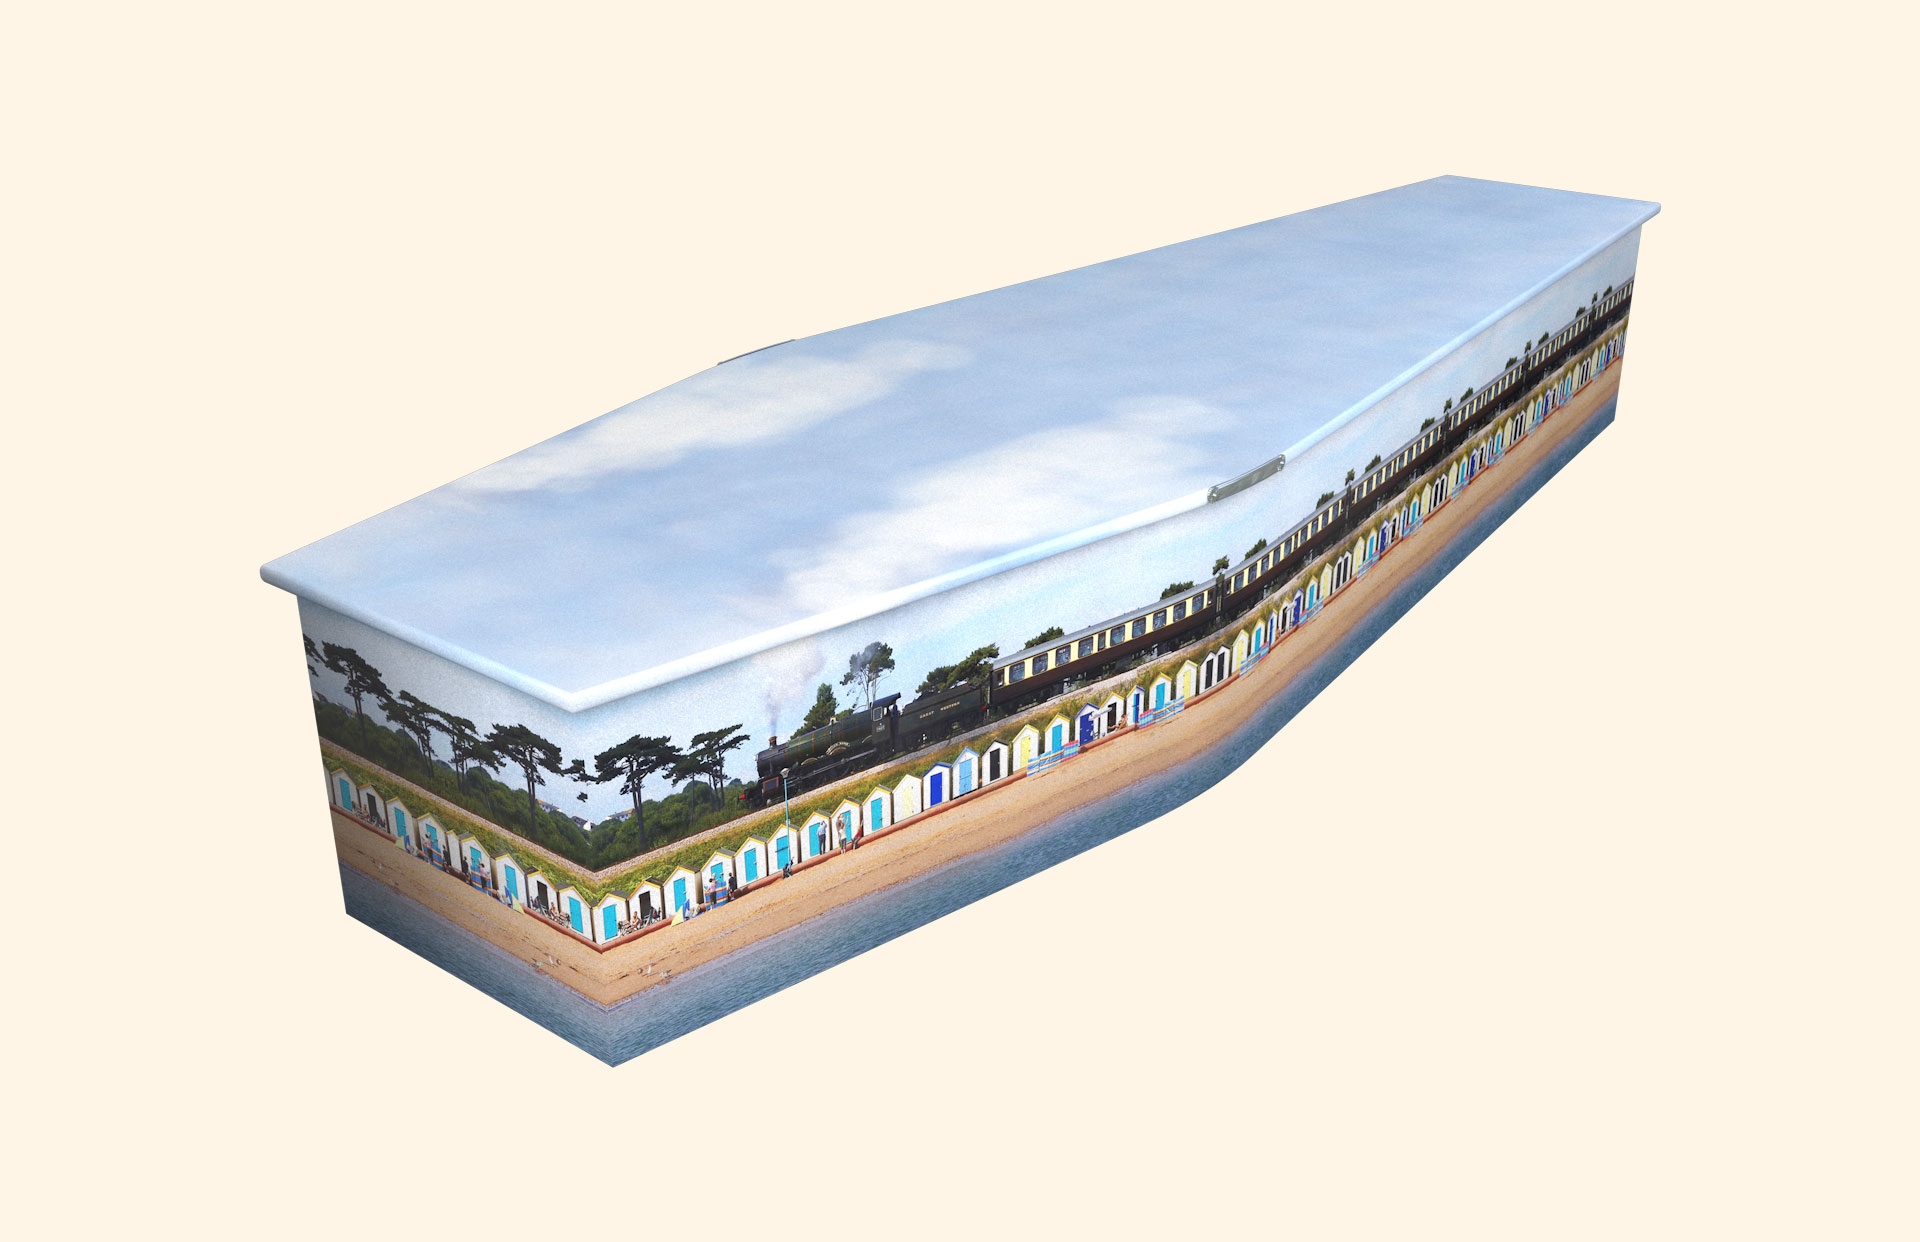 Seaside Train design on a traditional coffin